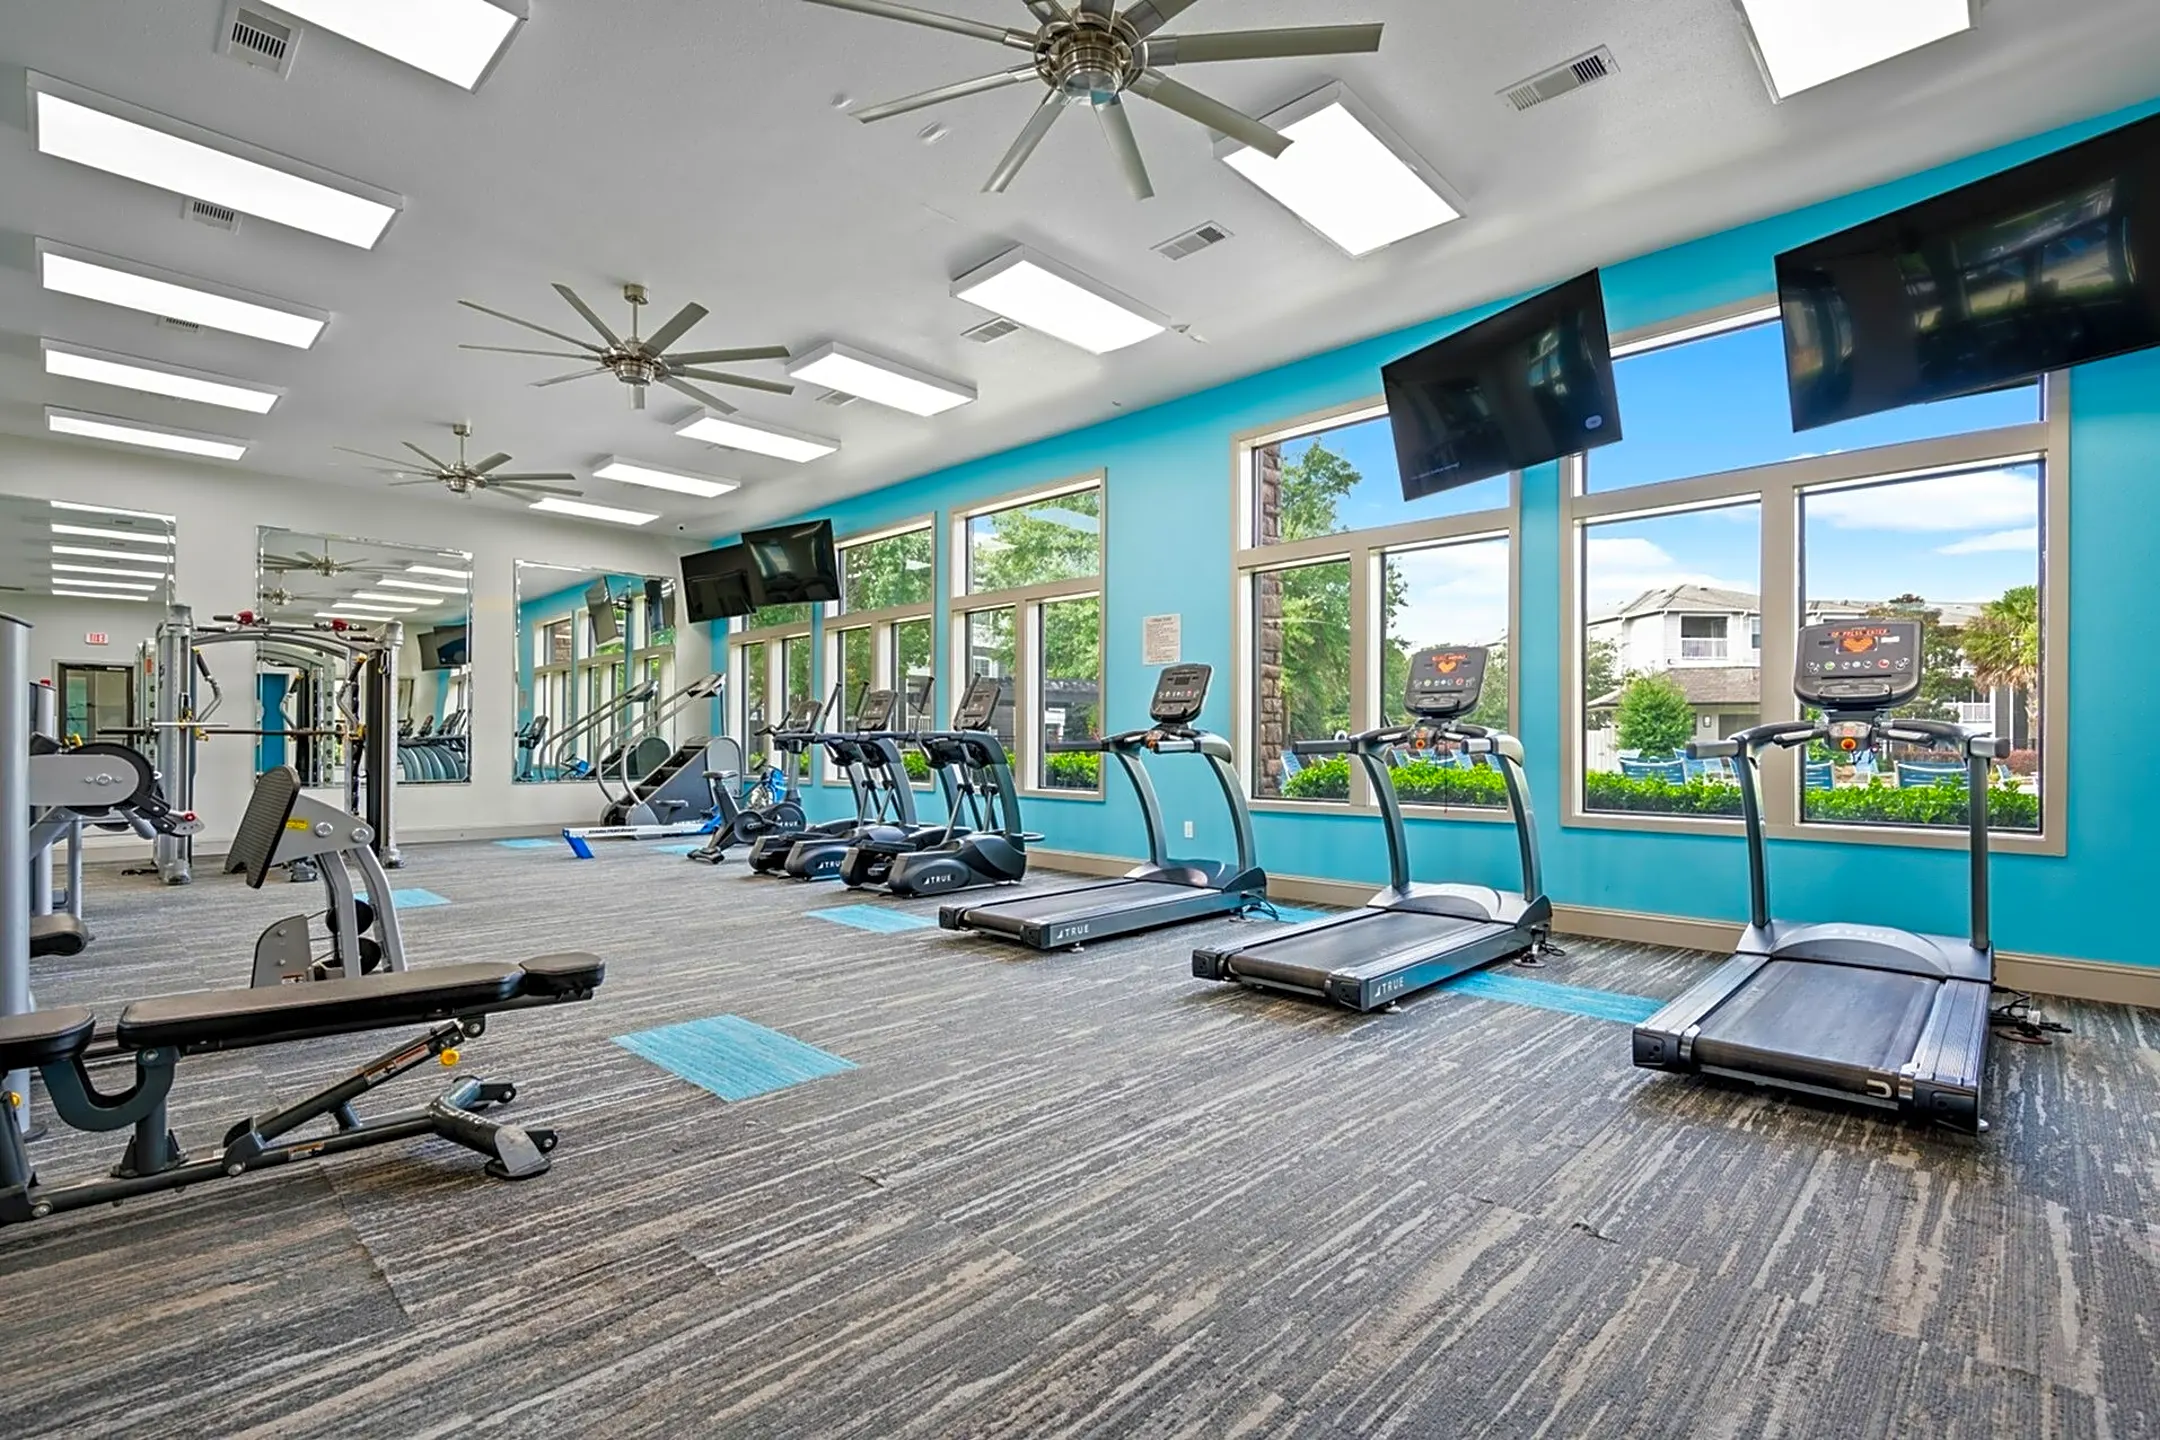 Fitness Weight Room - The Connection - Per Bed Lease - Statesboro, GA